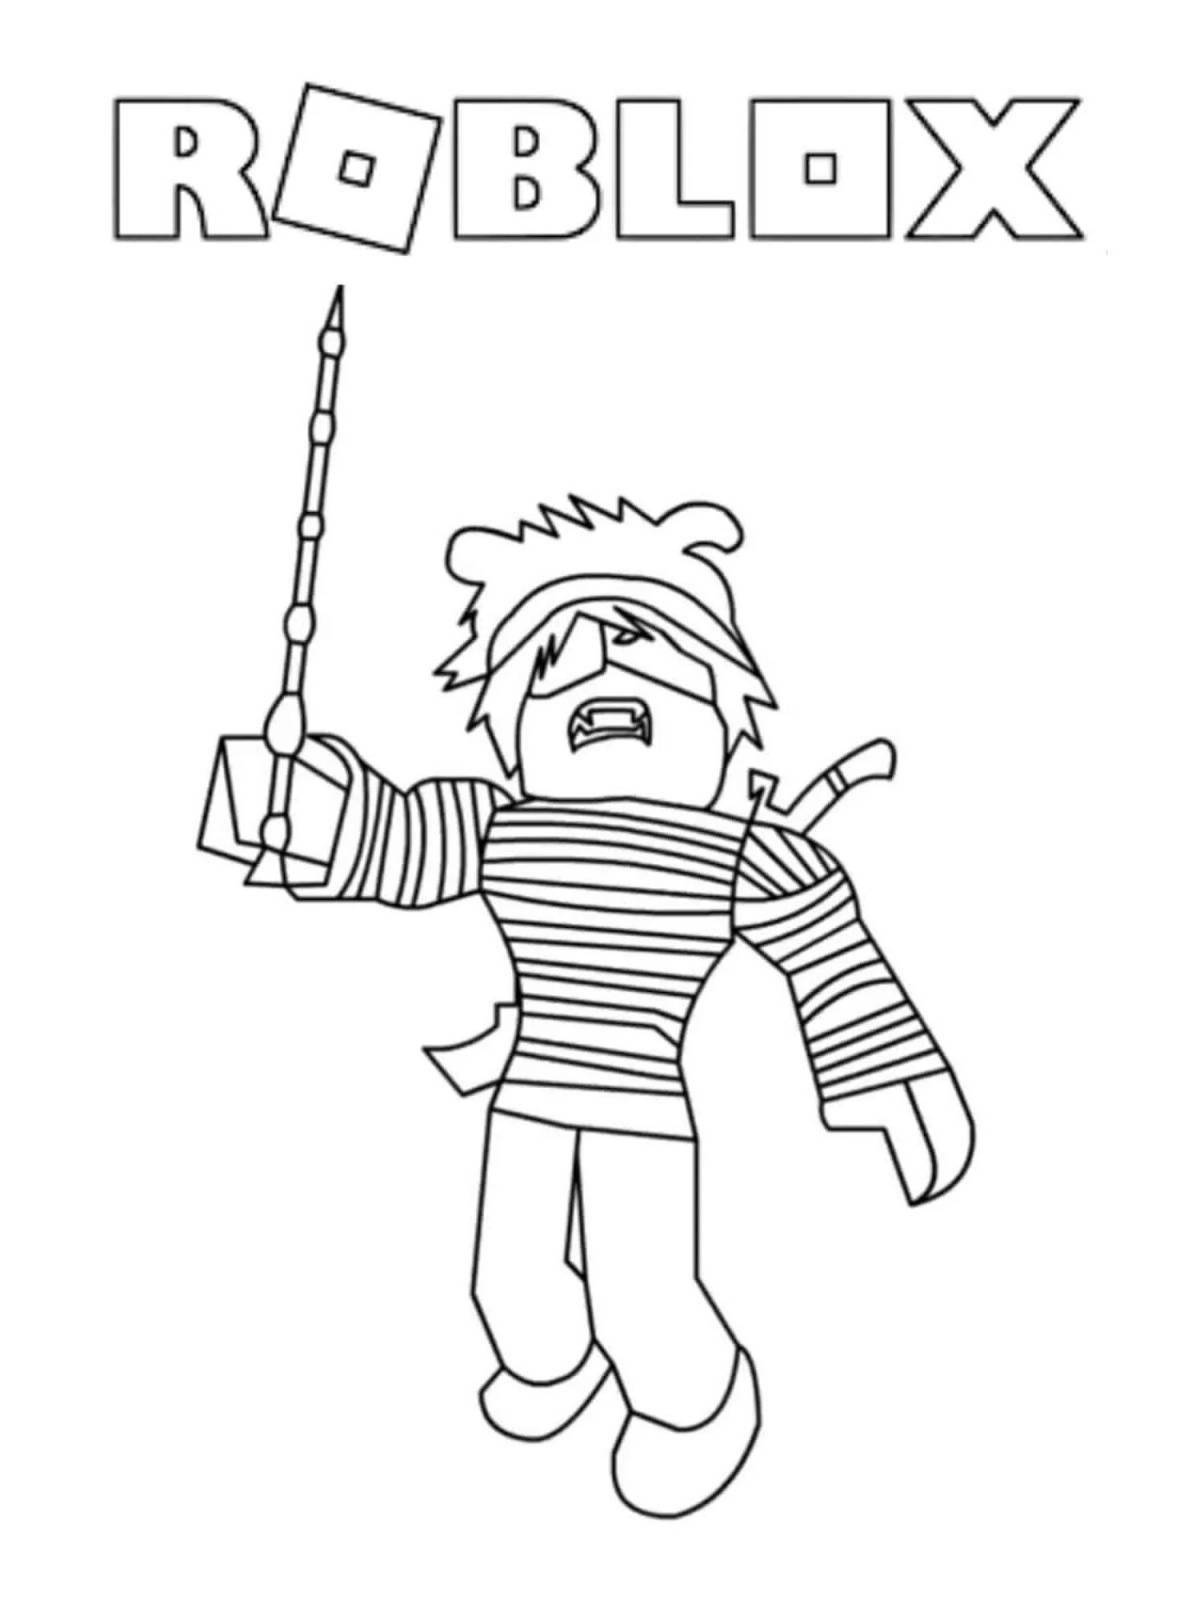 Colorful roblox coloring page for girls